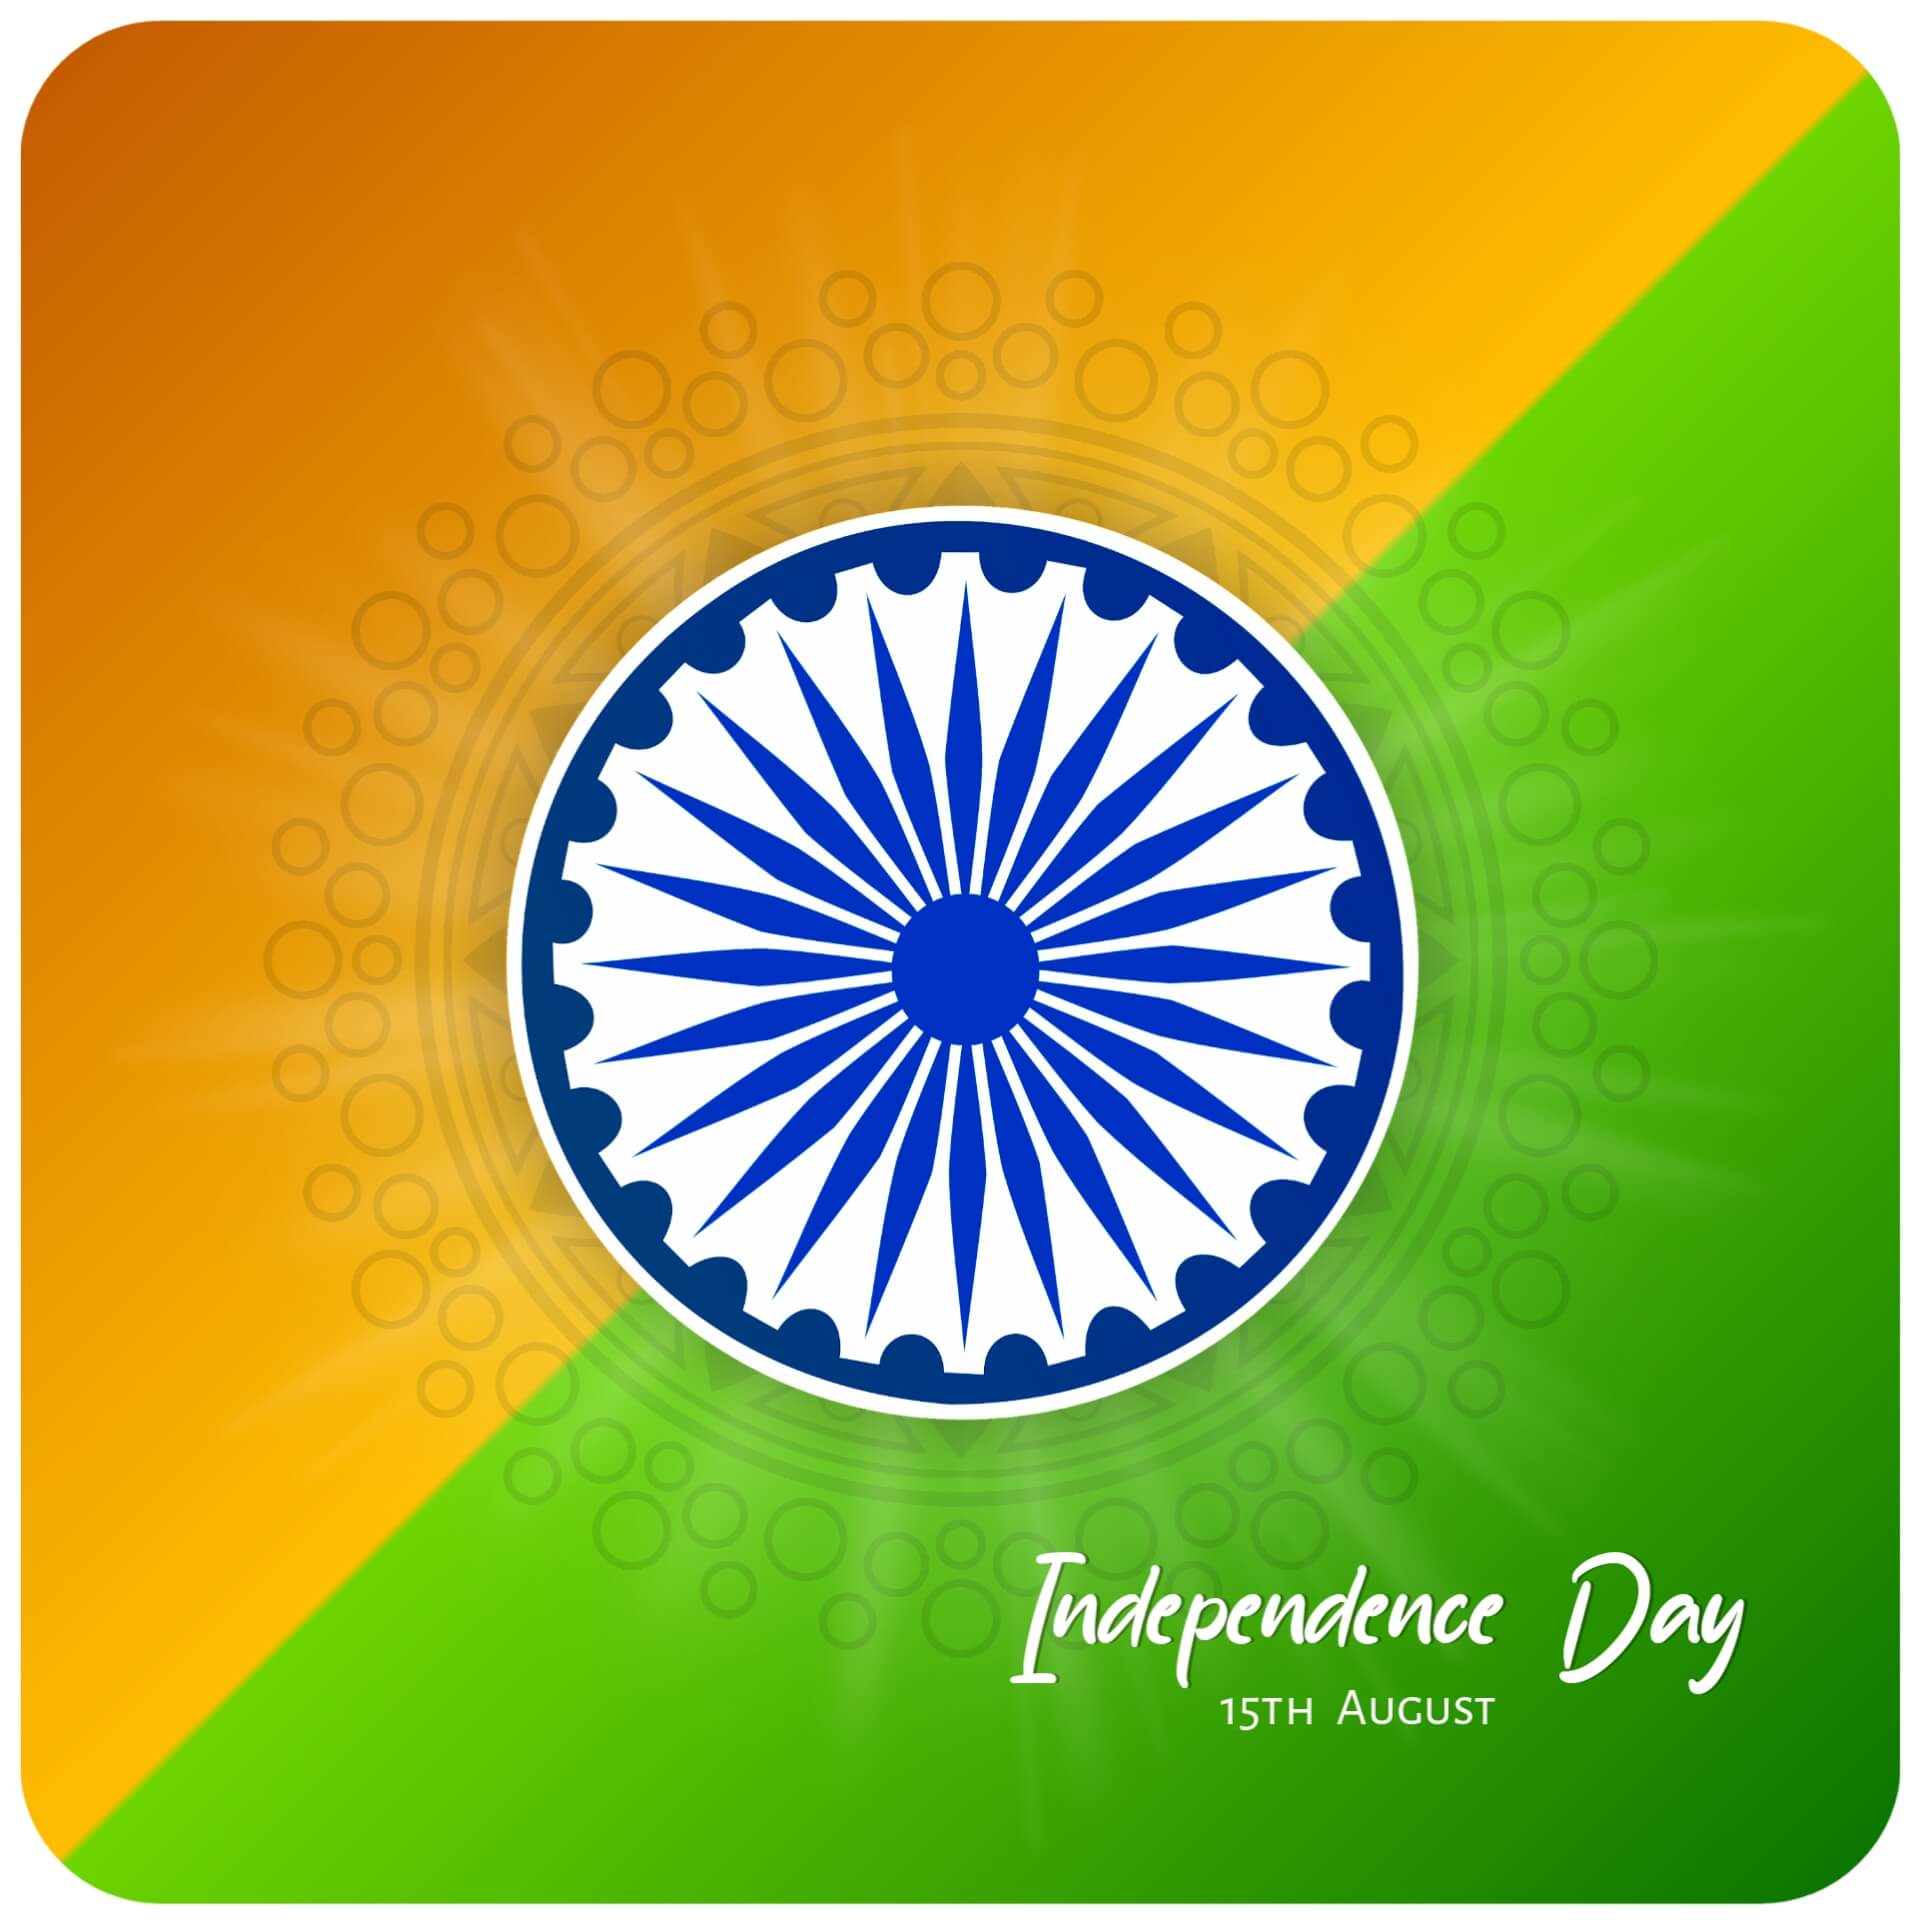 100+ Best India Independence Day Images, Photos & Pictures 2023